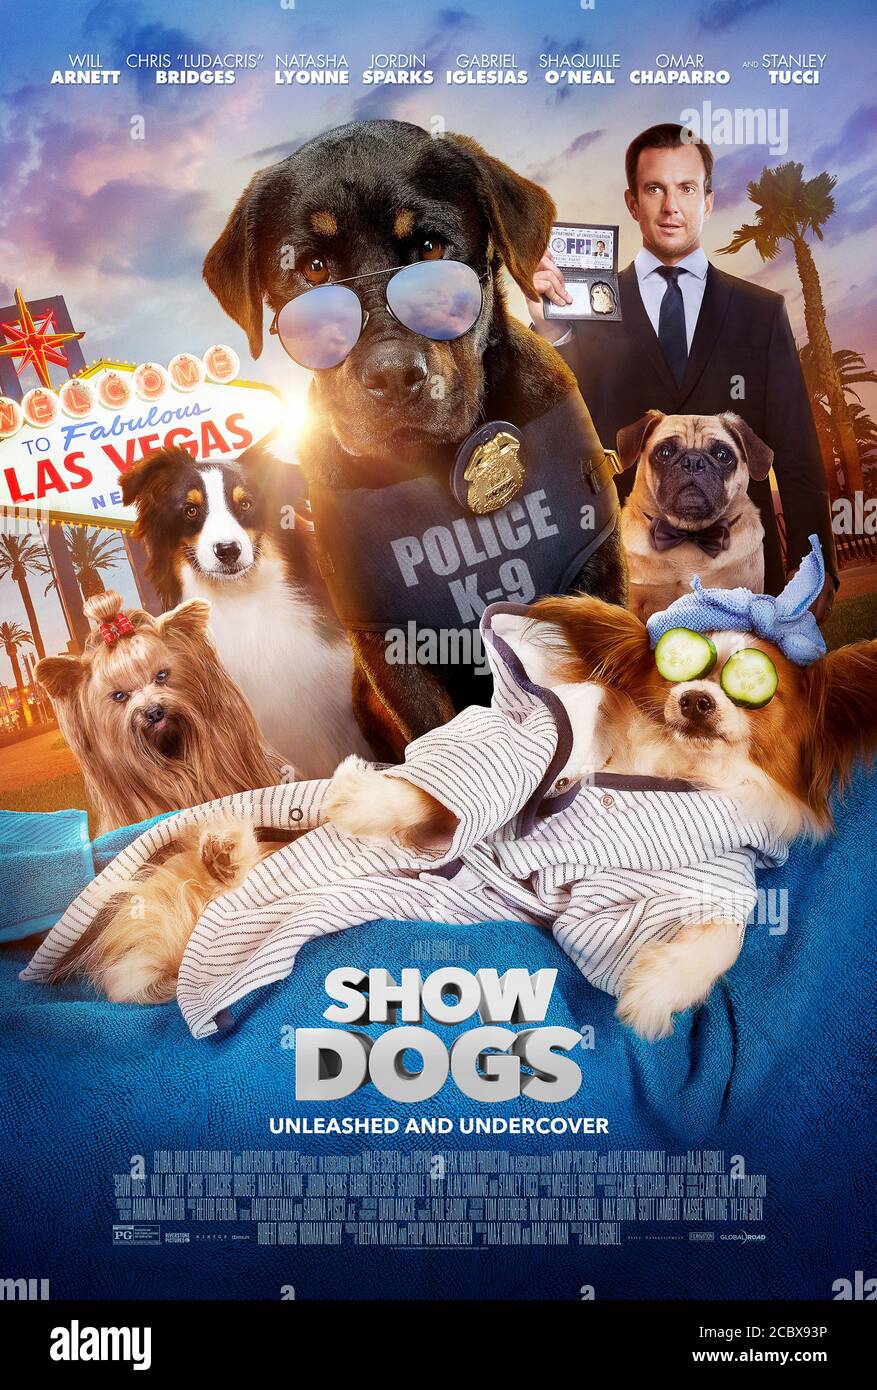 Show Dogs (2018) directed by Raja Gosnell and starring Will Arnett, Ludacris, Natasha Lyonne, Jordin Sparks Thomas and Stanley Tucci. Max the police dog goes undercover at a dog show. Stock Photo